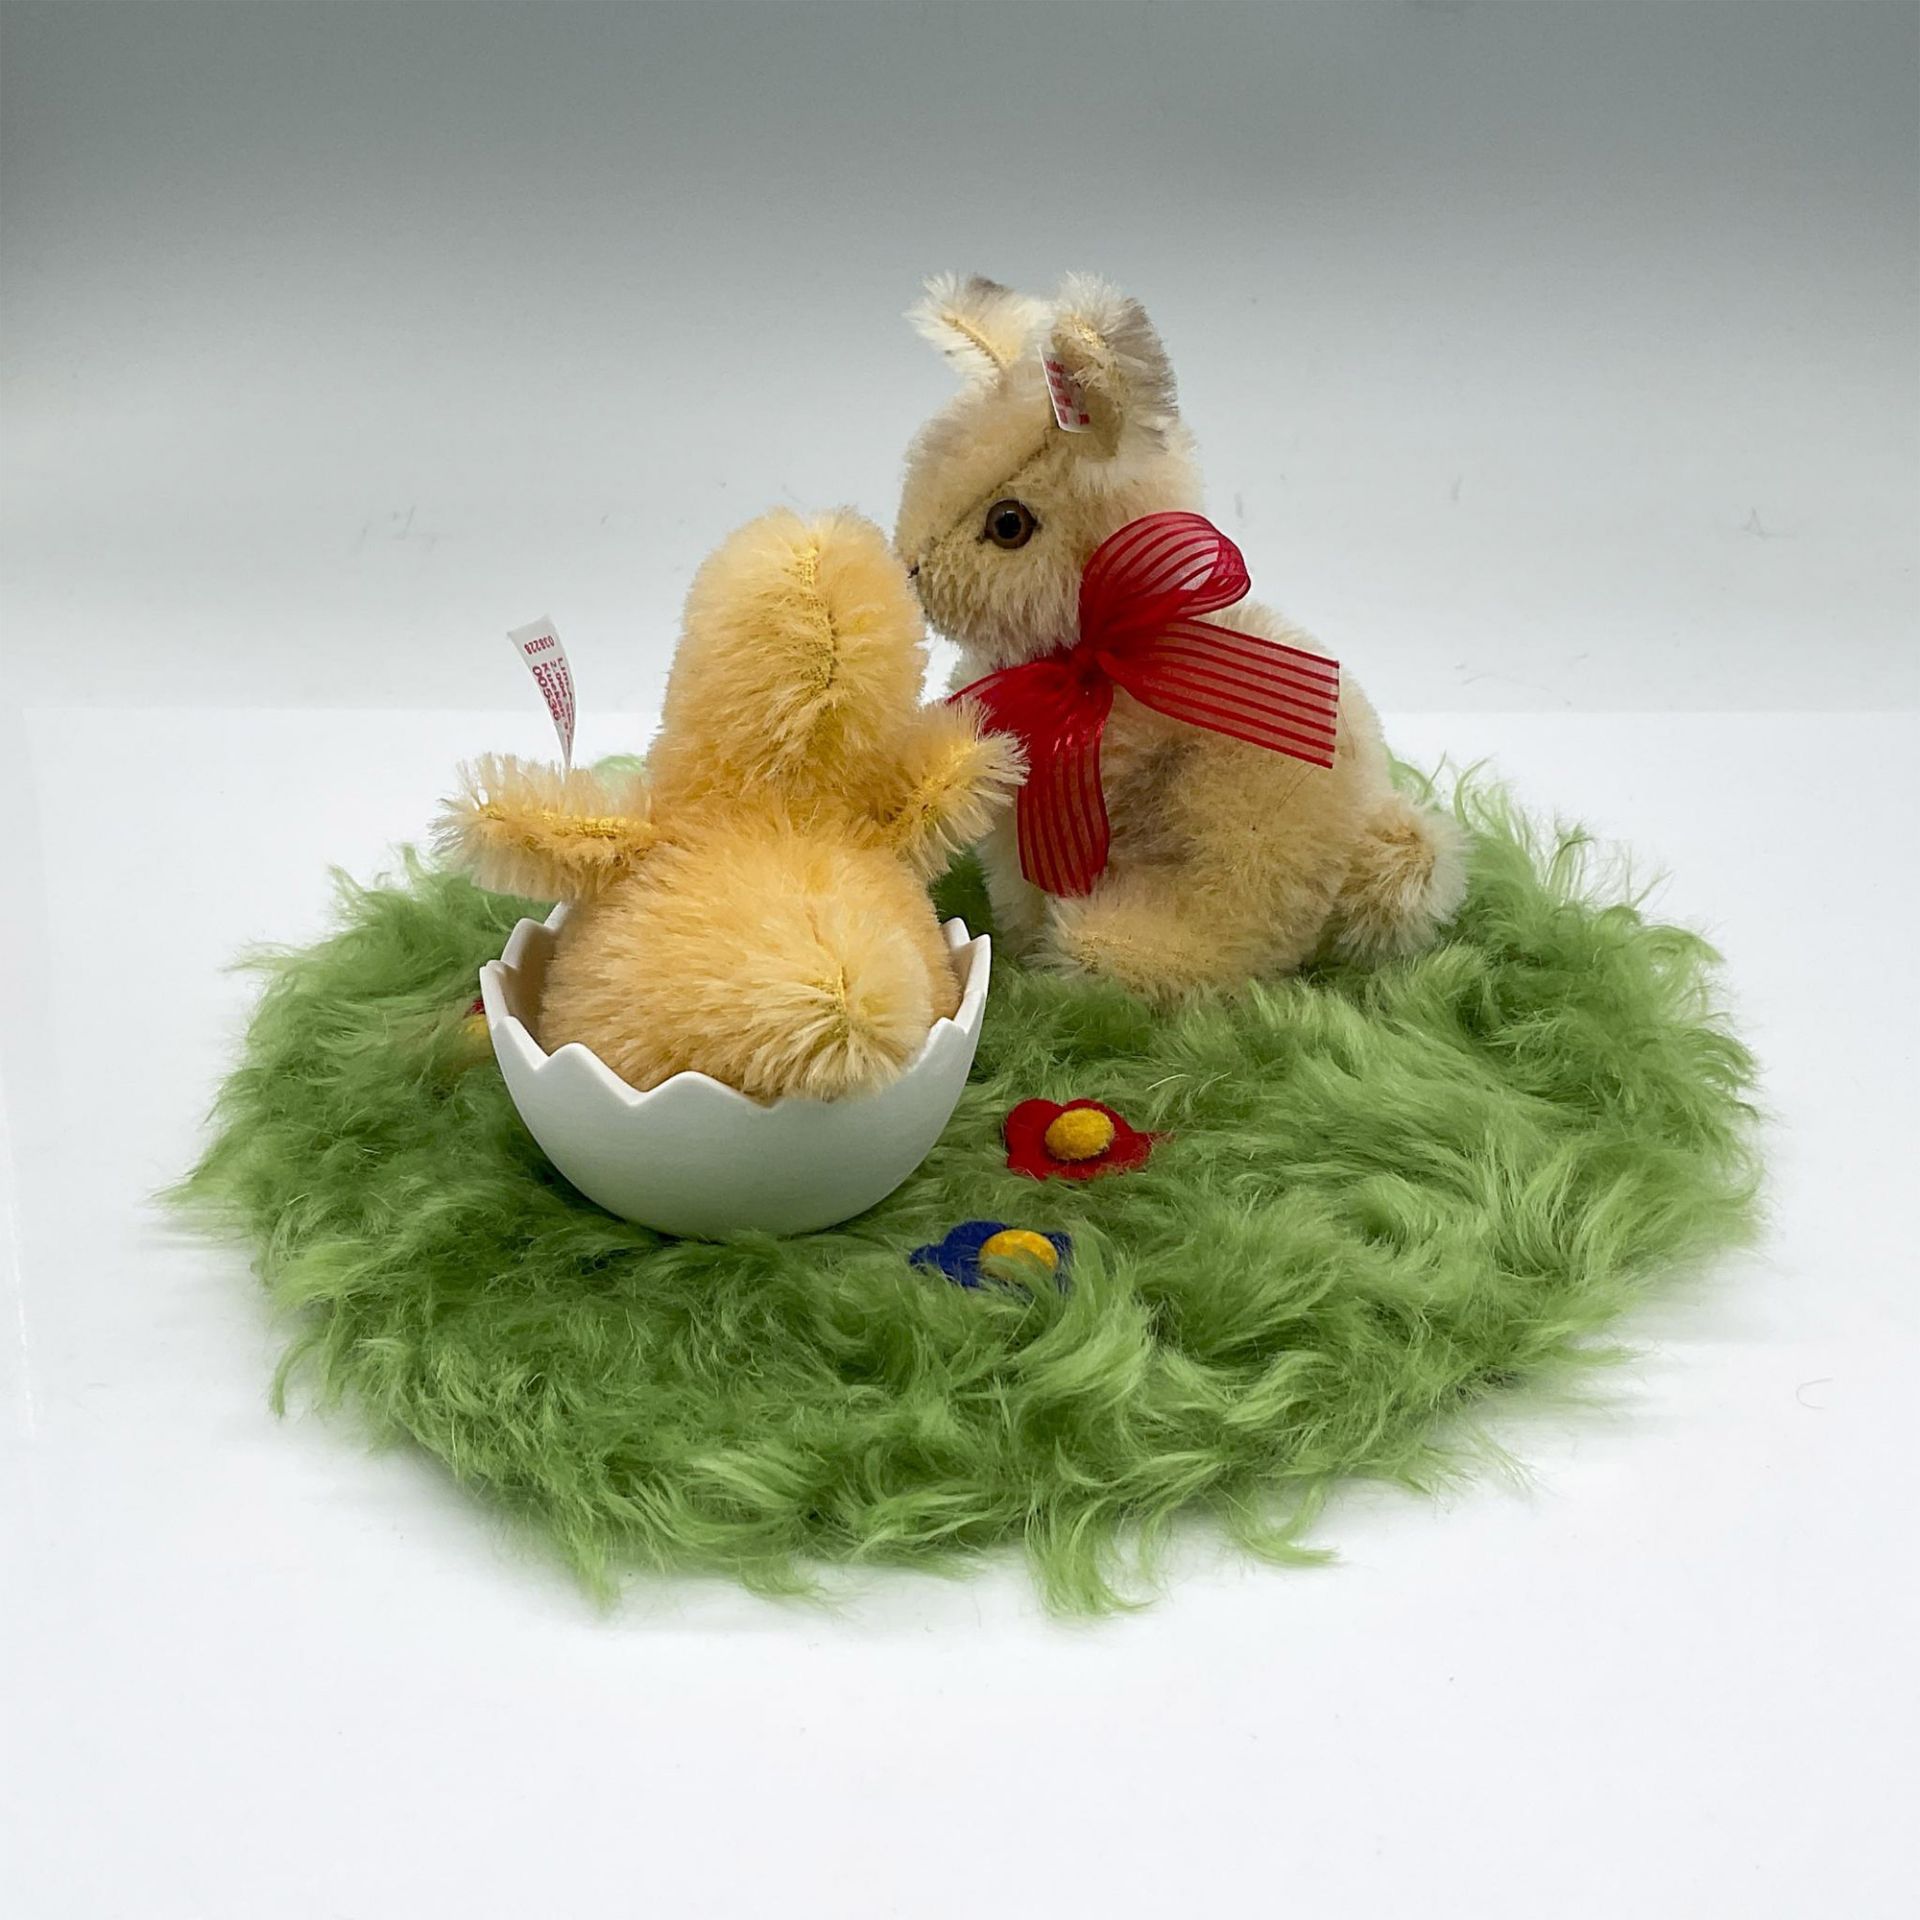 Steiff Mohair Figures, Easter Diorama of Bunny and Chick - Bild 2 aus 5